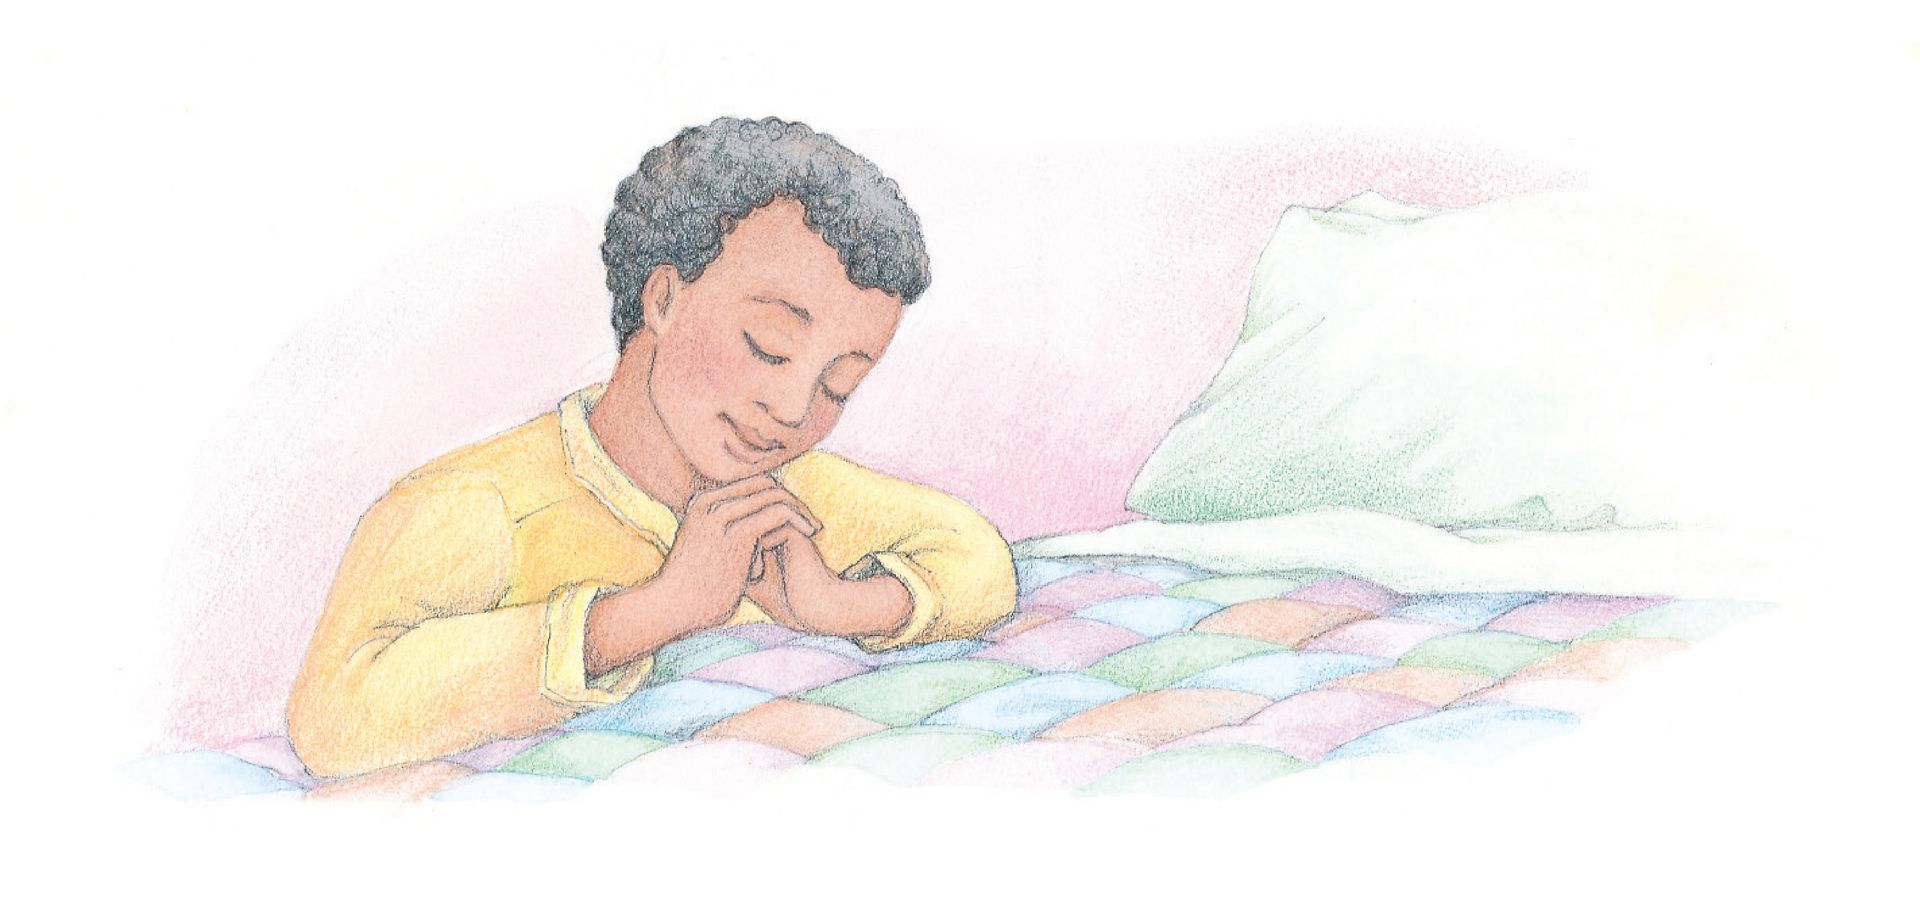 A boy kneeling by his bed and praying. From the Children’s Songbook, page 6, “Thanks to Thee”; watercolor illustration by Phyllis Luch.